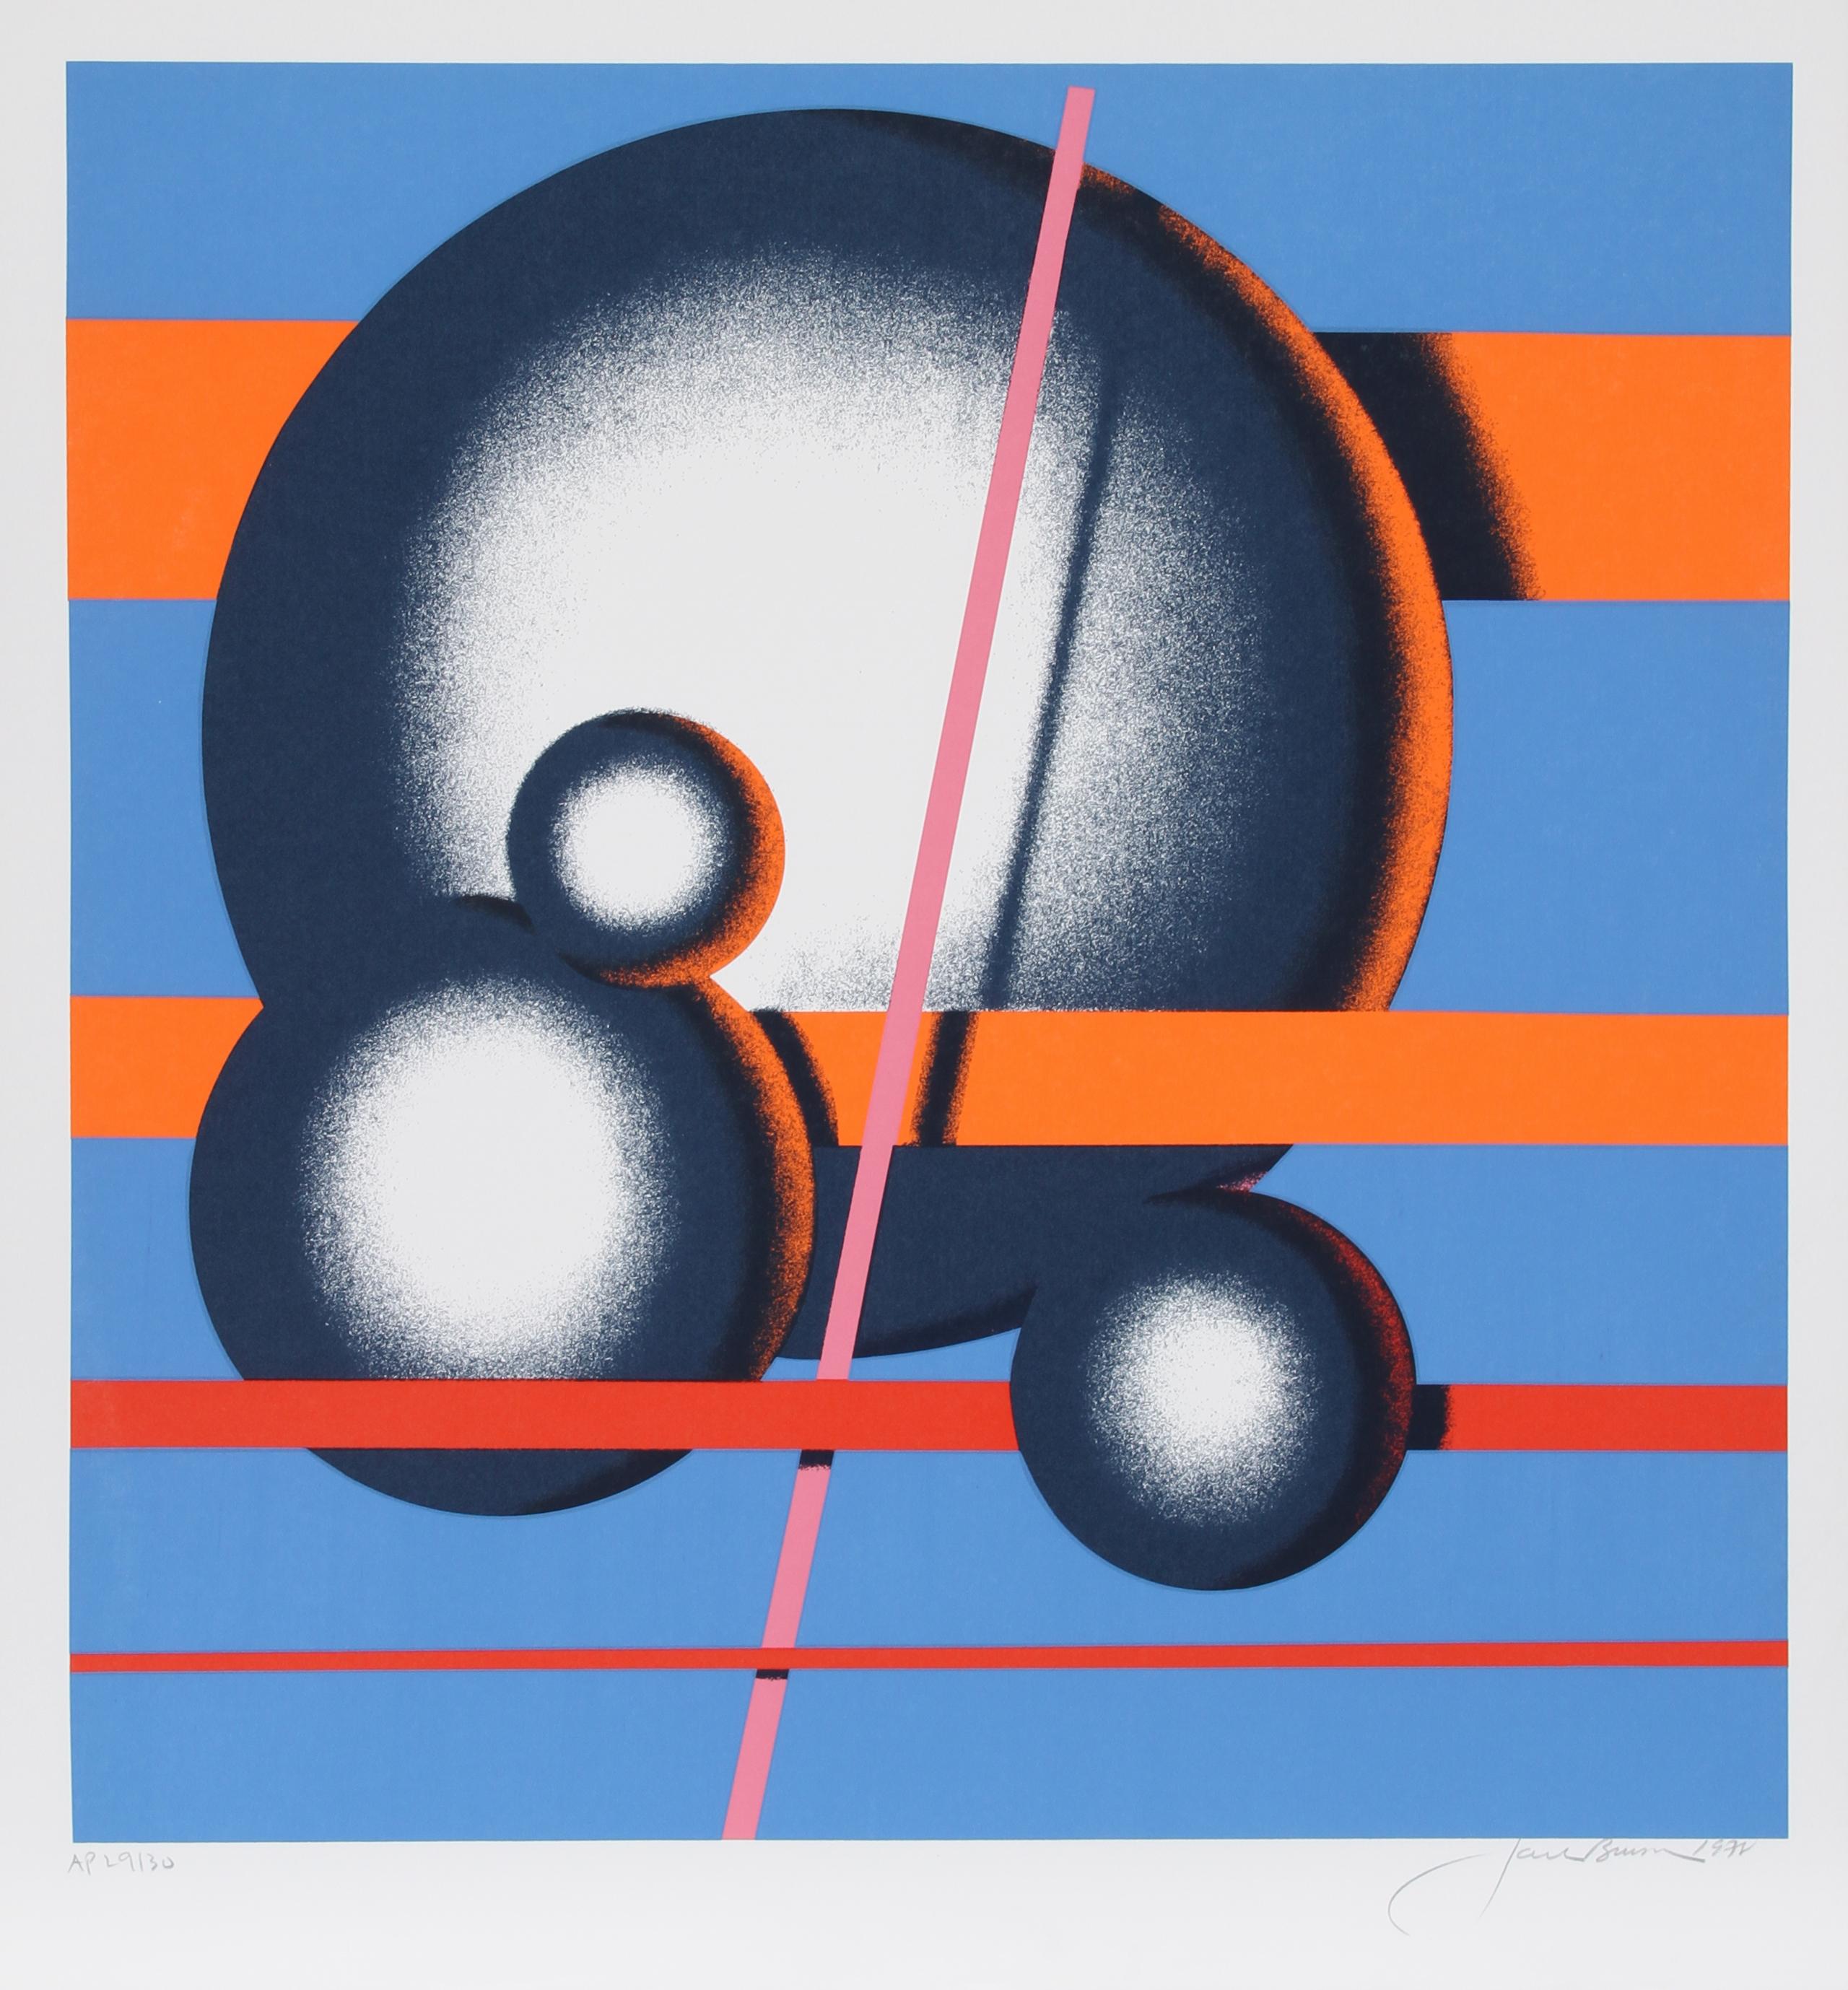 Artist: Jack Brusca, American (1939 - 1993)
Title: Galaxy
Year: 1978
Medium: Serigraph, signed and numbered in pencil
Edition: 200, AP 30
Image Size: 24 x 24 inches
Size: 27 in. x 26 in. (68.58 cm x 66.04 cm)